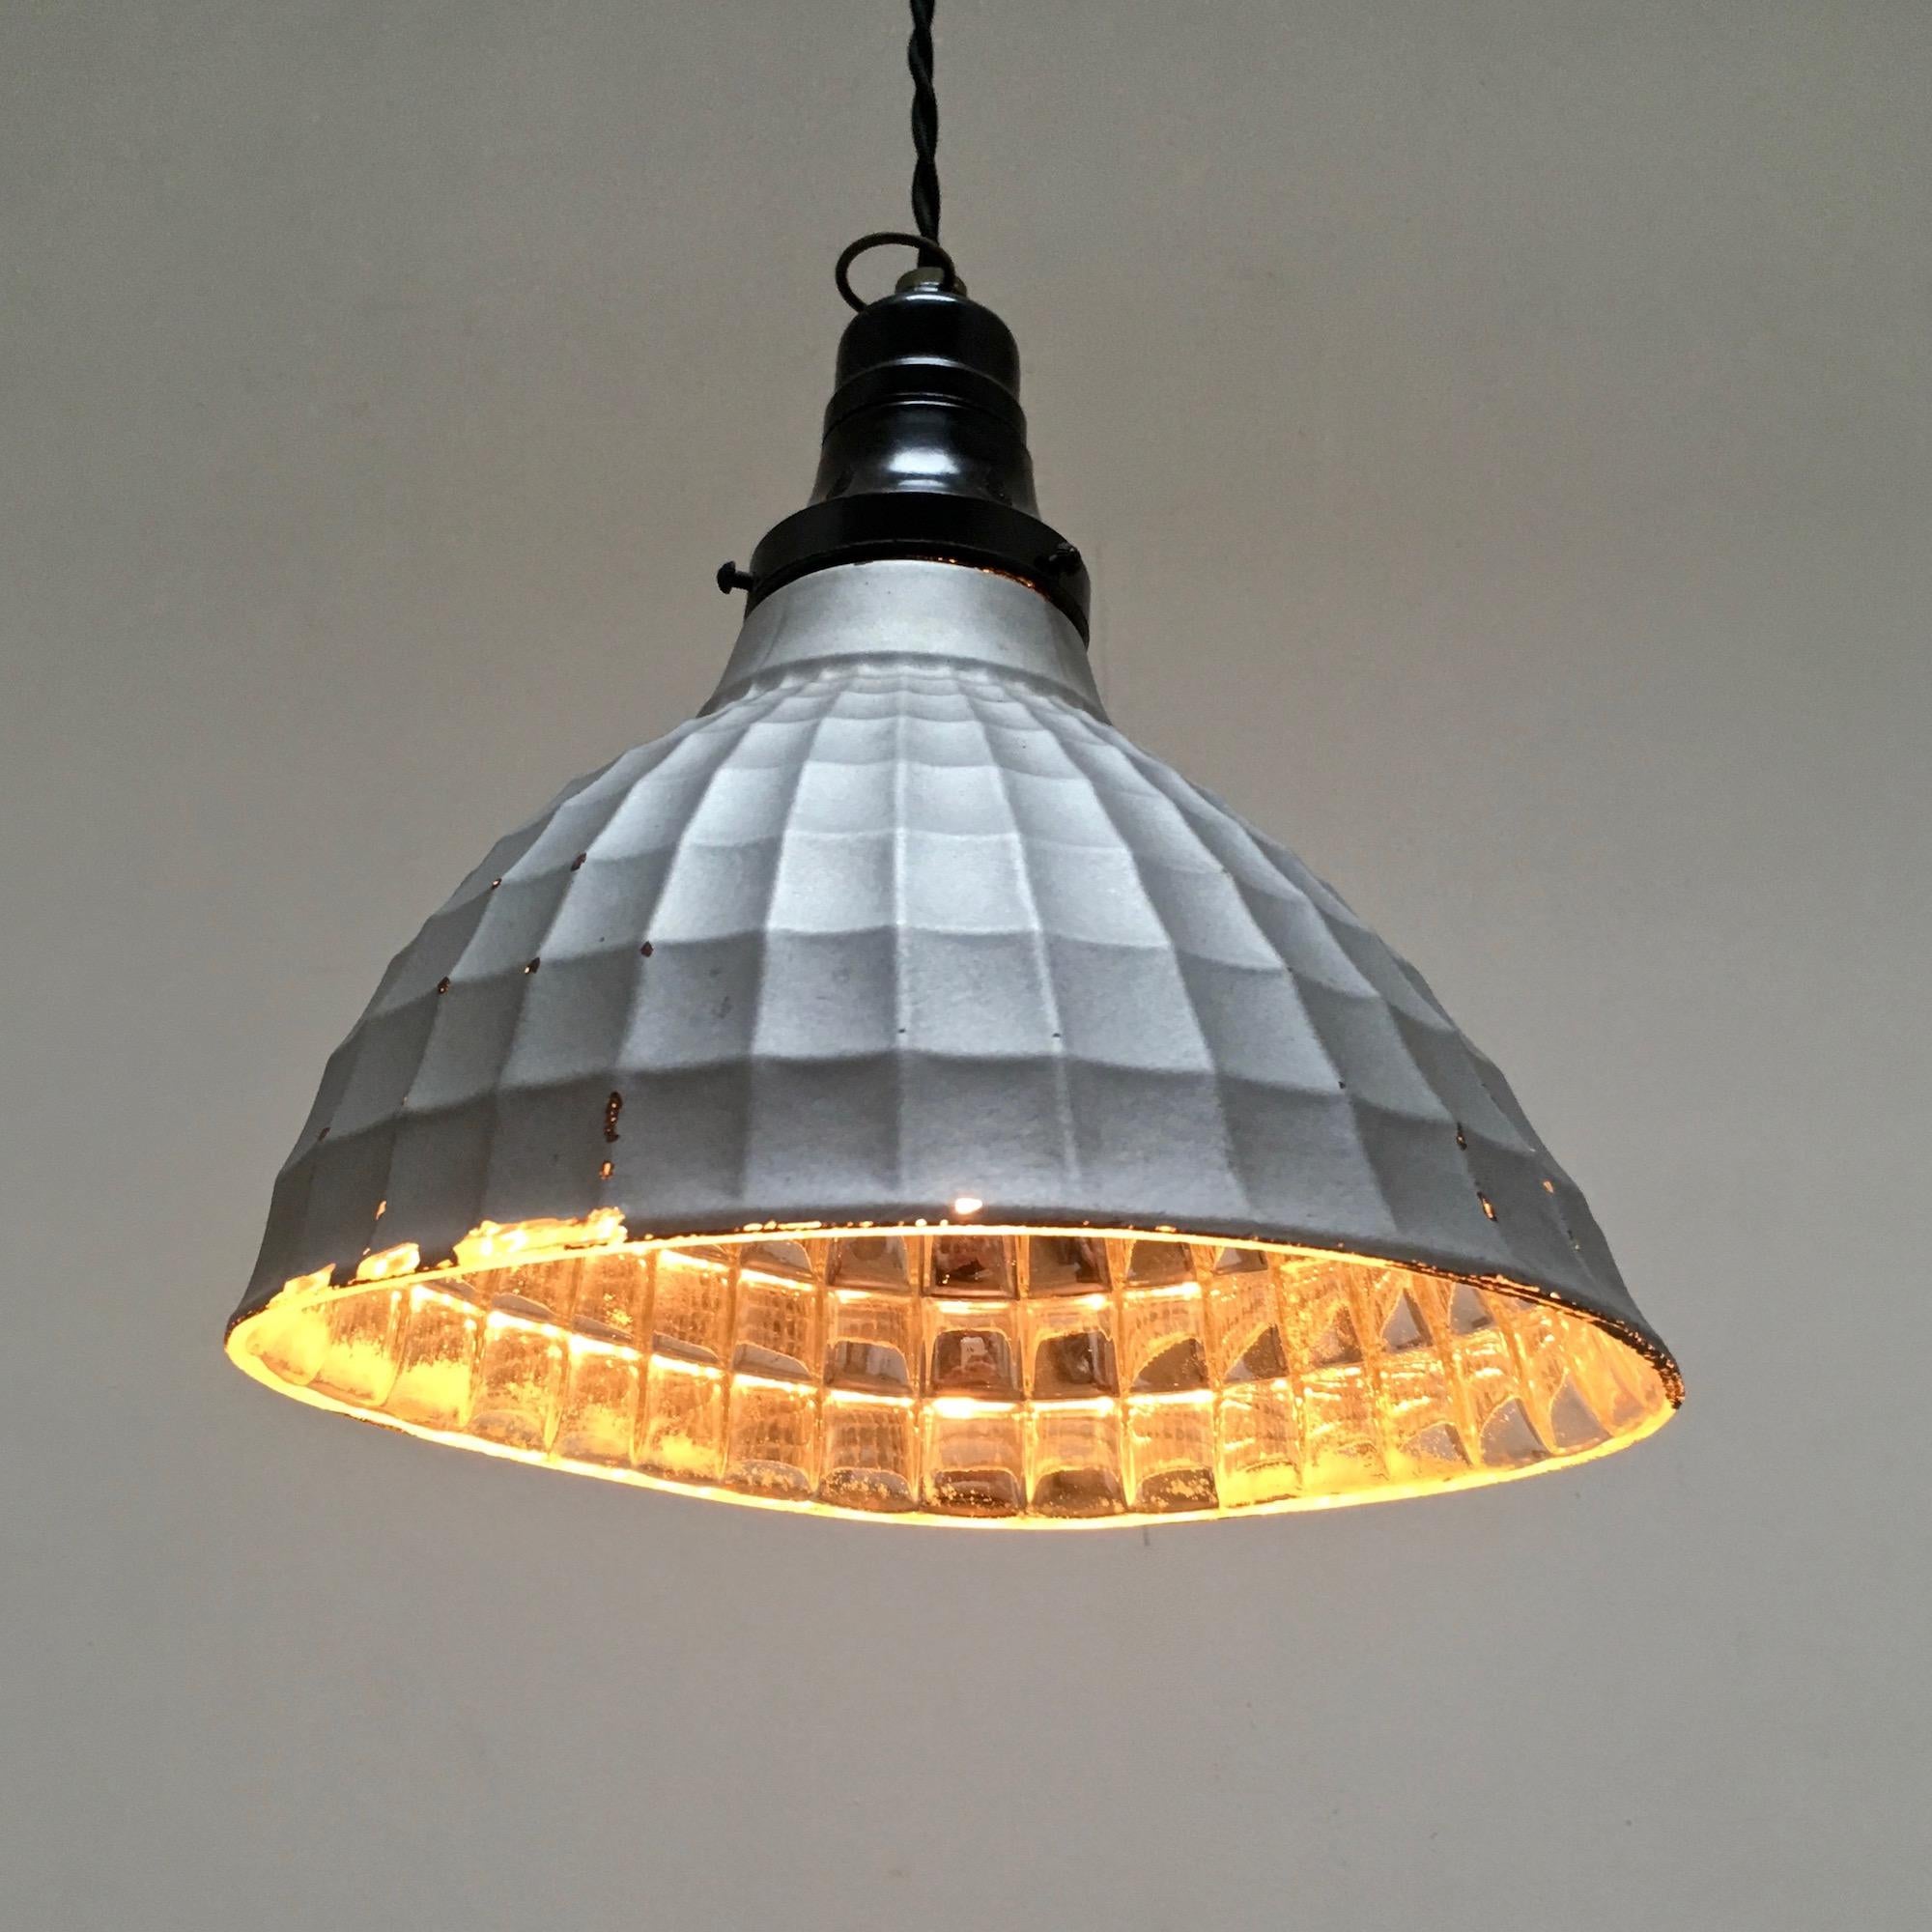 1930s Industrial pendant lamp by 